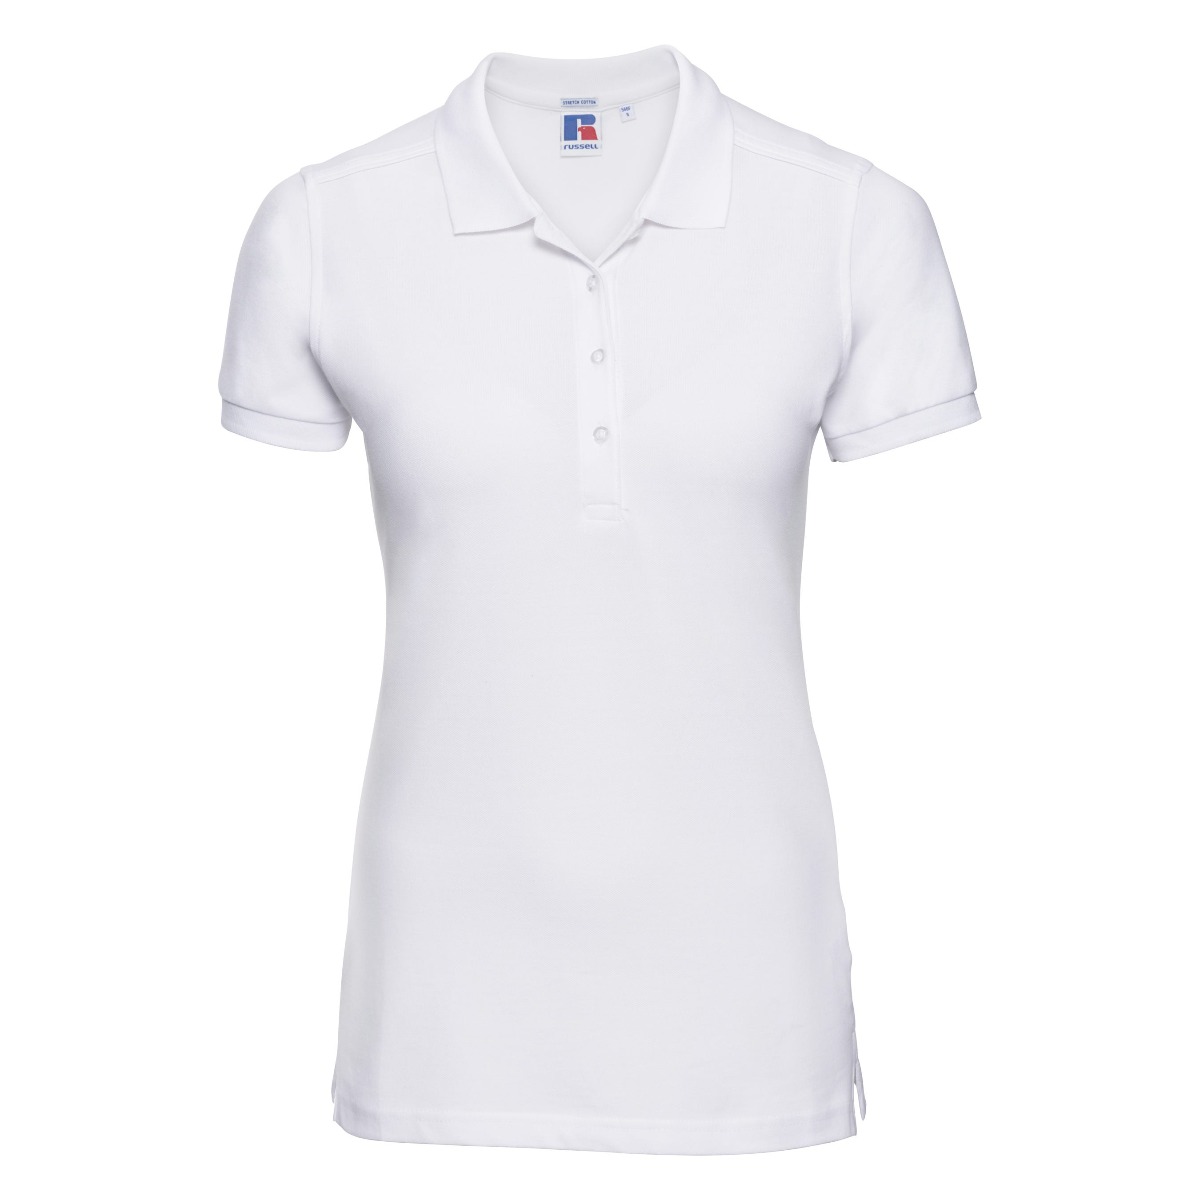 ax-httpswebsystems.s3.amazonaws.comtmp_for_downloadrussell-womens-stretch-white_2.jpg